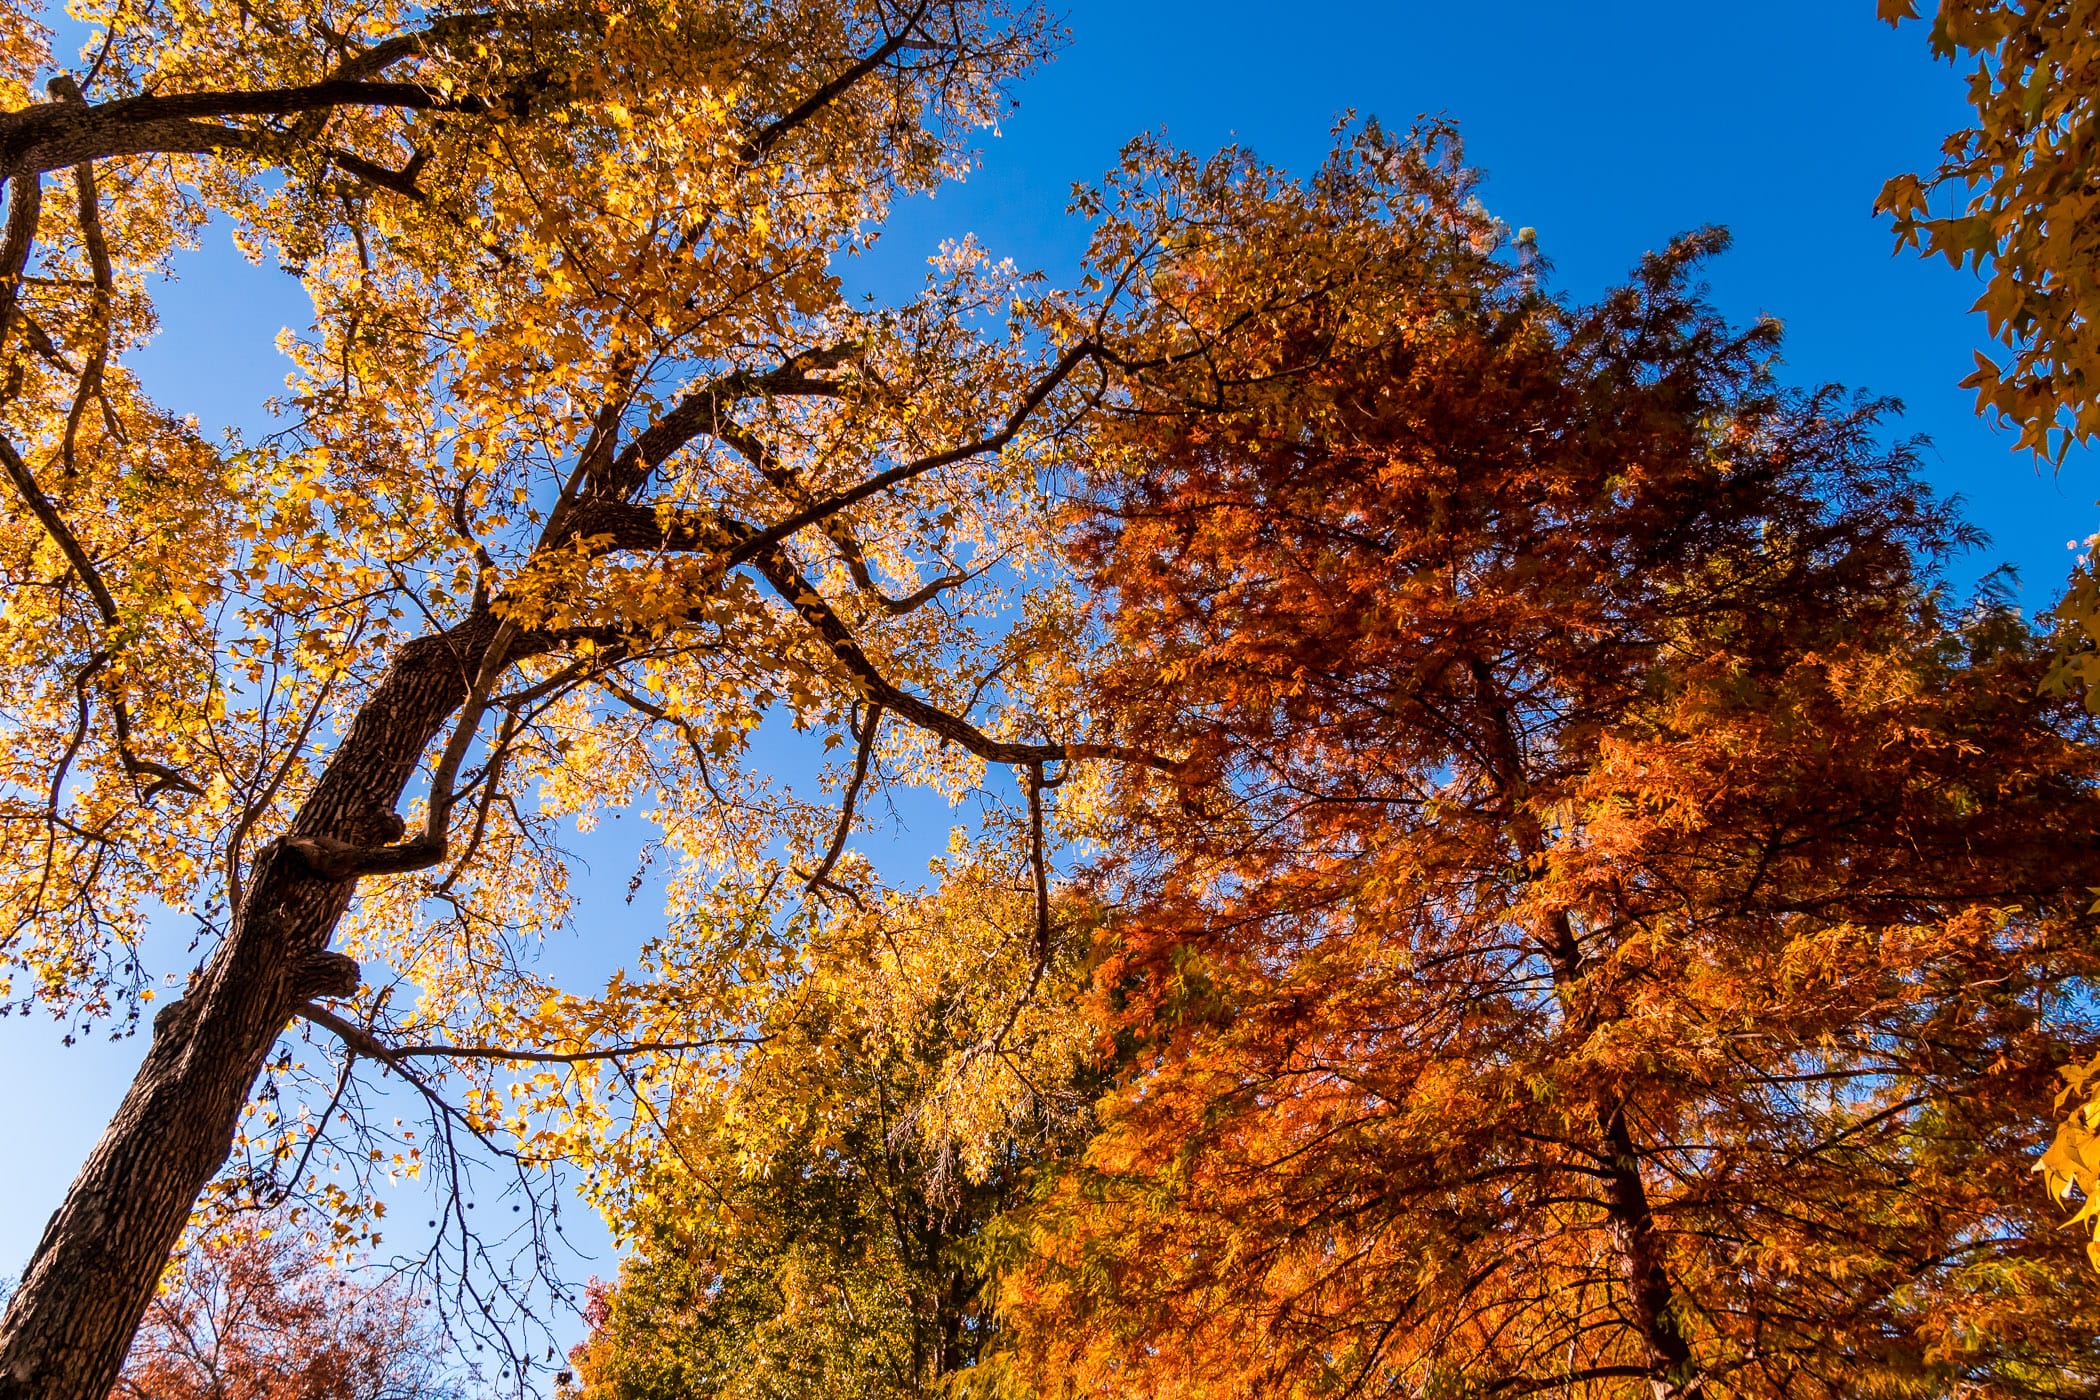 The many colors of autumn trees in Tyler, Texas' Bergfeld Park.